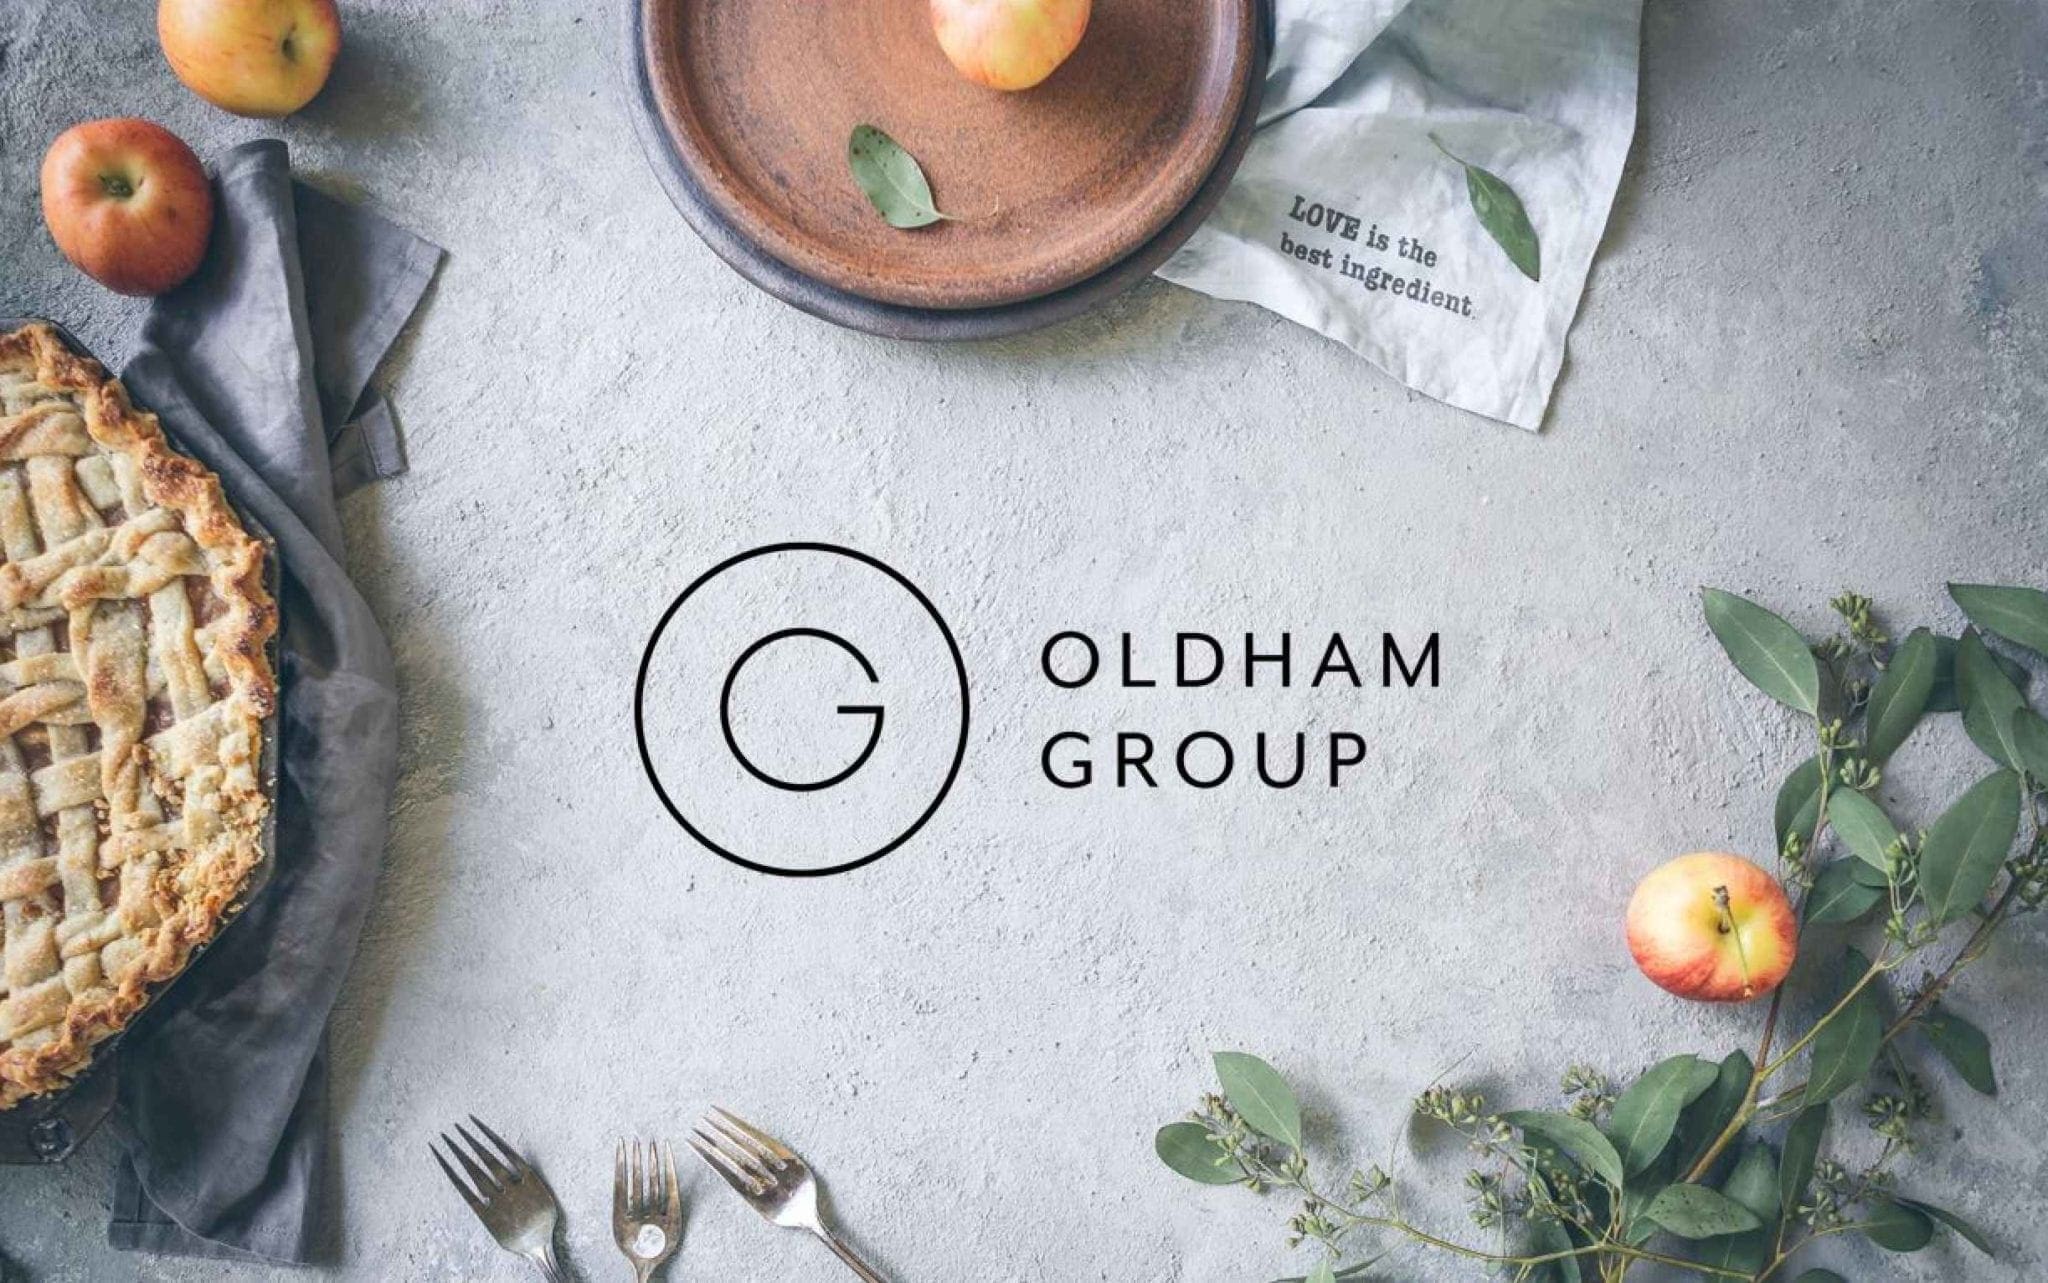 The Oldham Group | Updates November 13, 2020